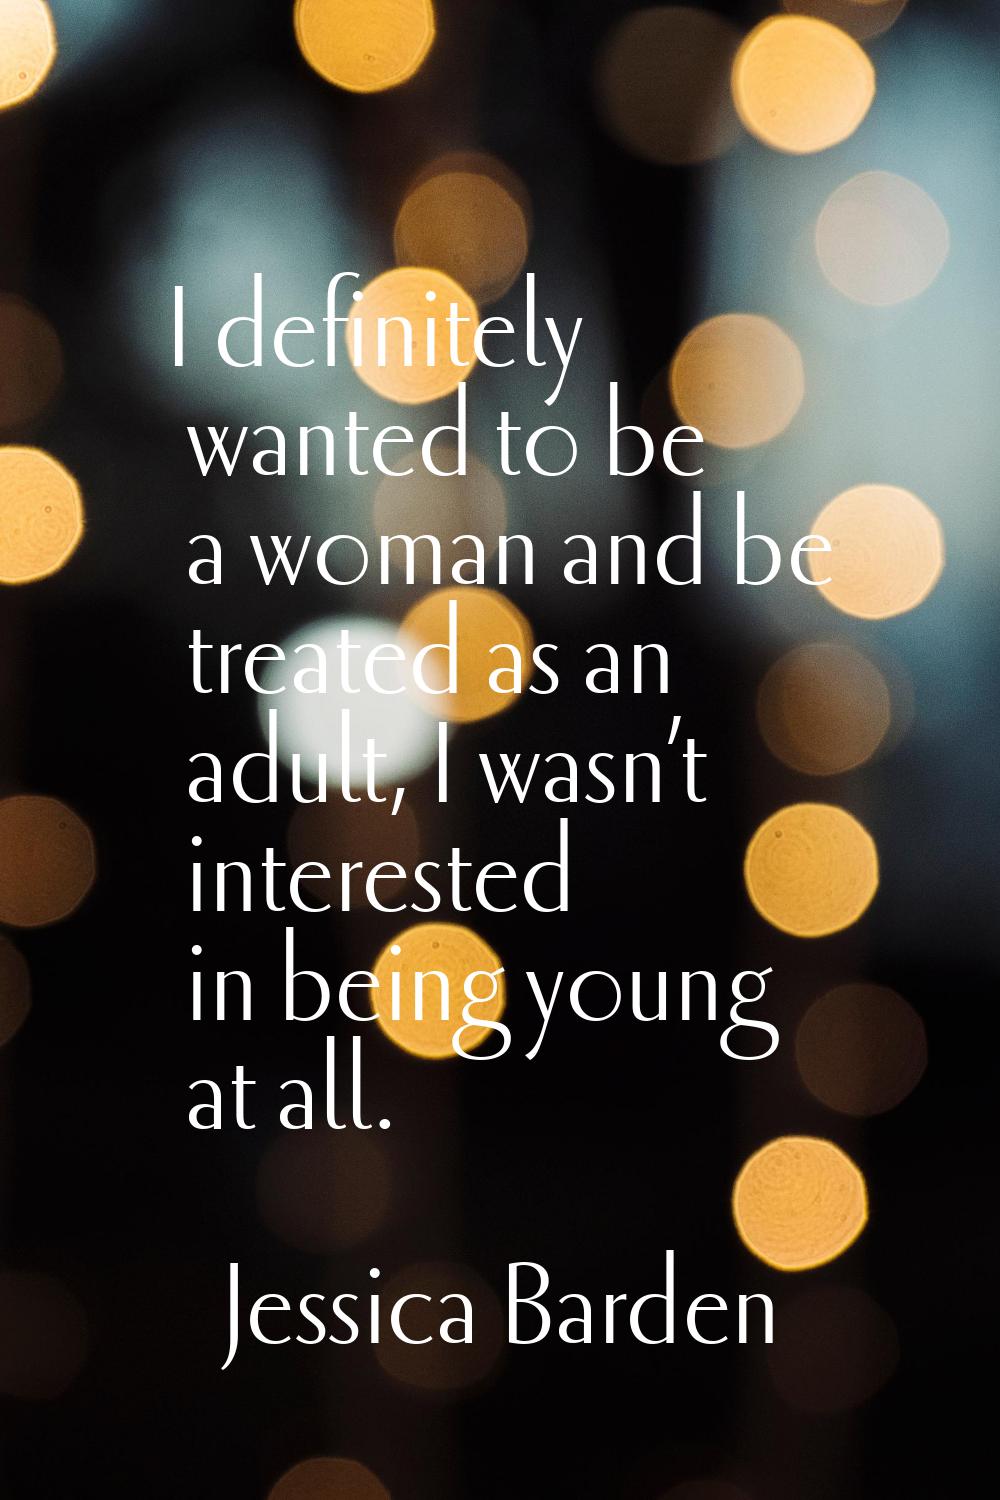 I definitely wanted to be a woman and be treated as an adult, I wasn’t interested in being young at